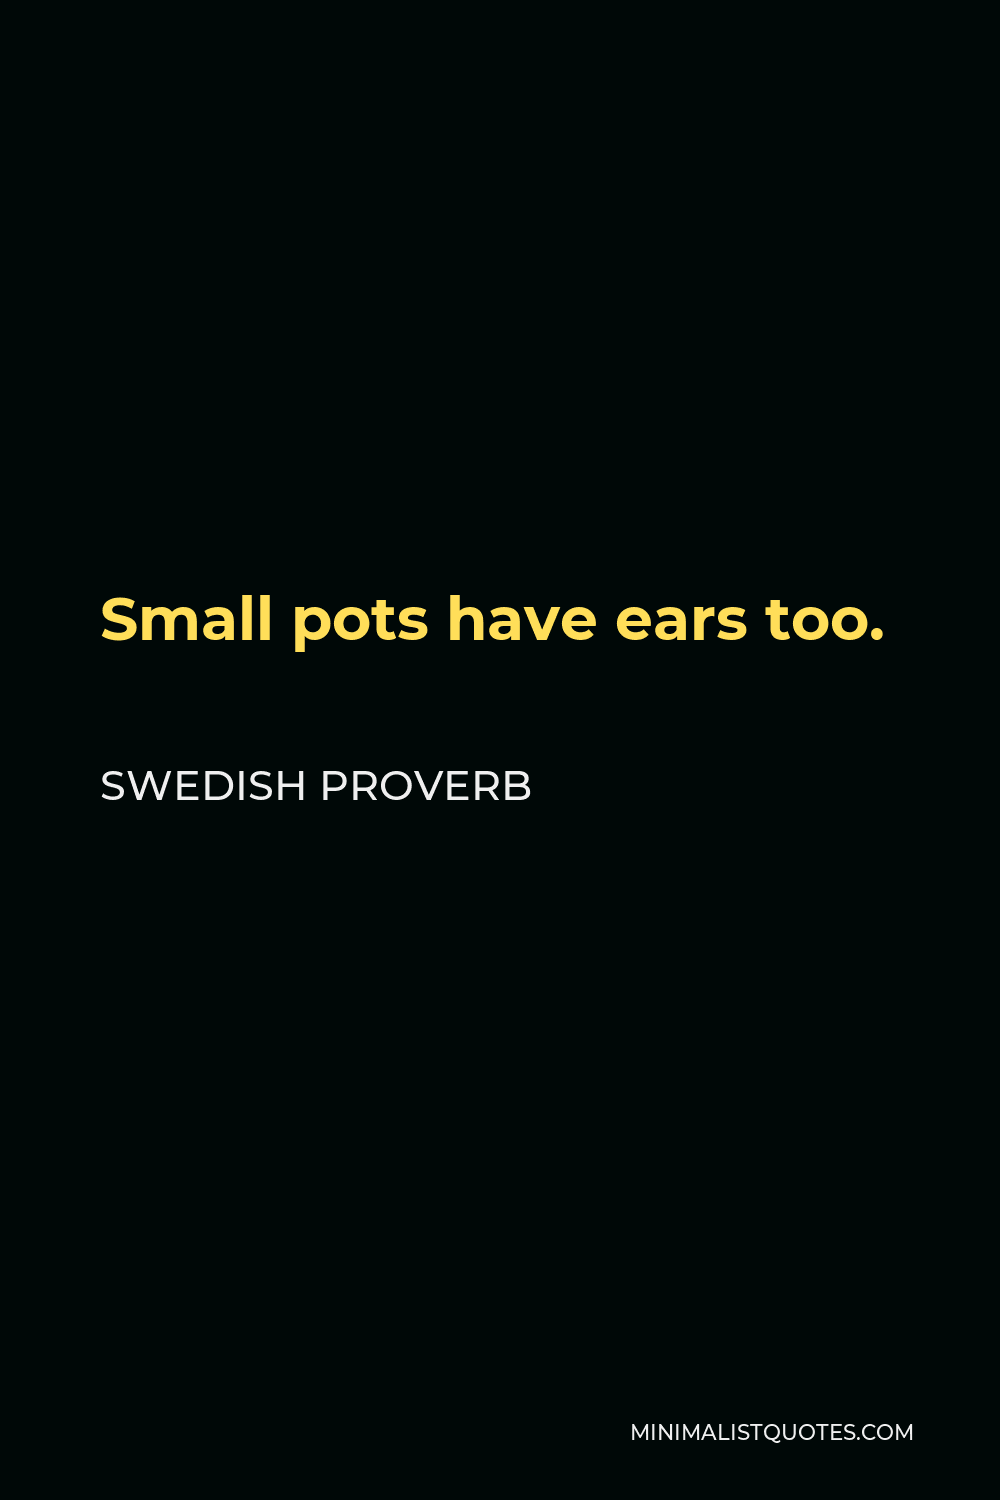 Swedish Proverb Quote - Small pots have ears too.